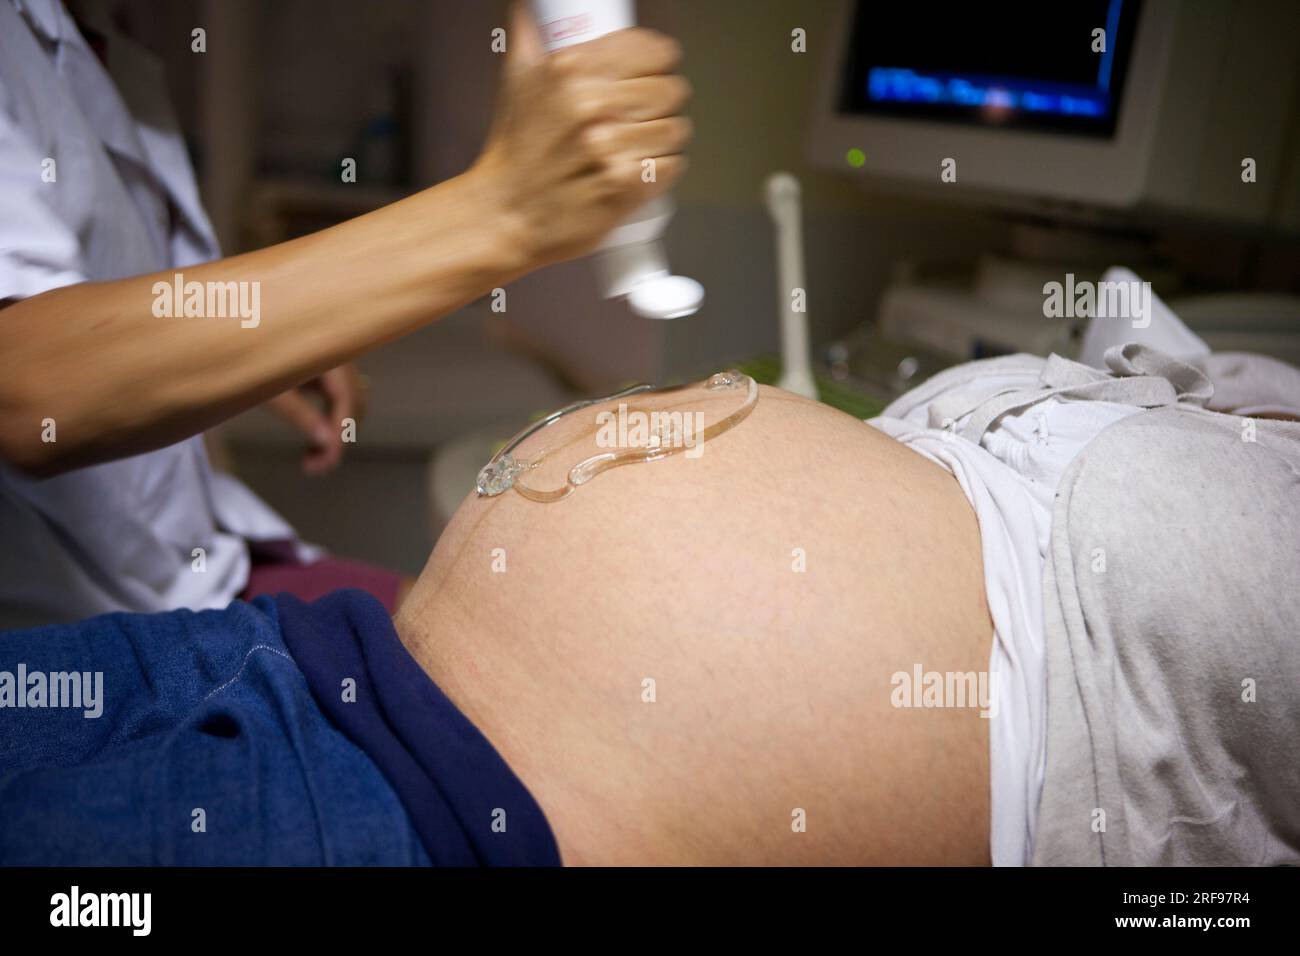 Ultrasound scan of a pregnant woman at 8 months pregnant in the maternity ward of the hospital. Stock Photo